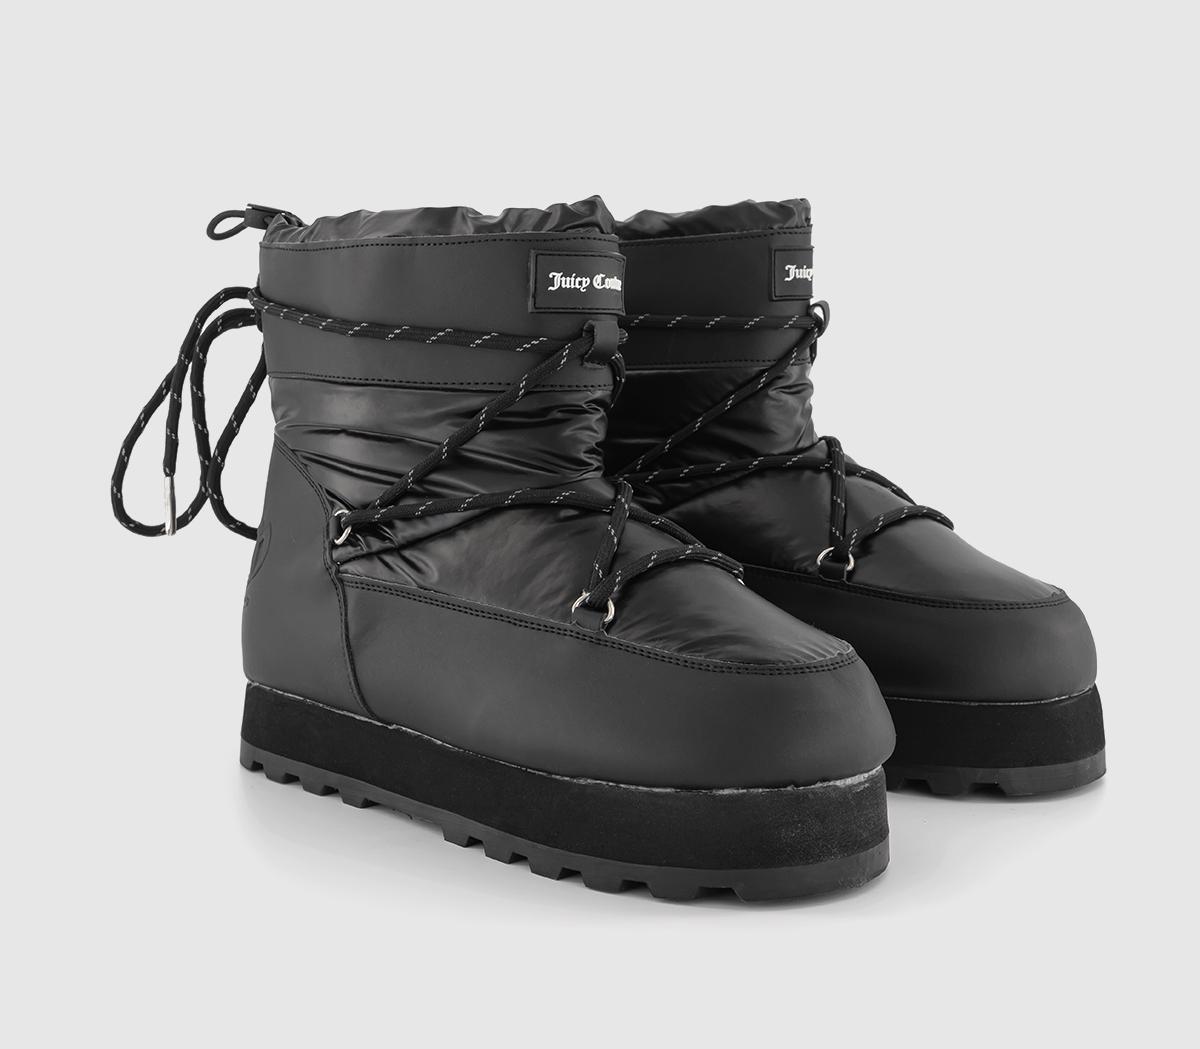 Juicy Couture Womens Mars Boots Black, 4